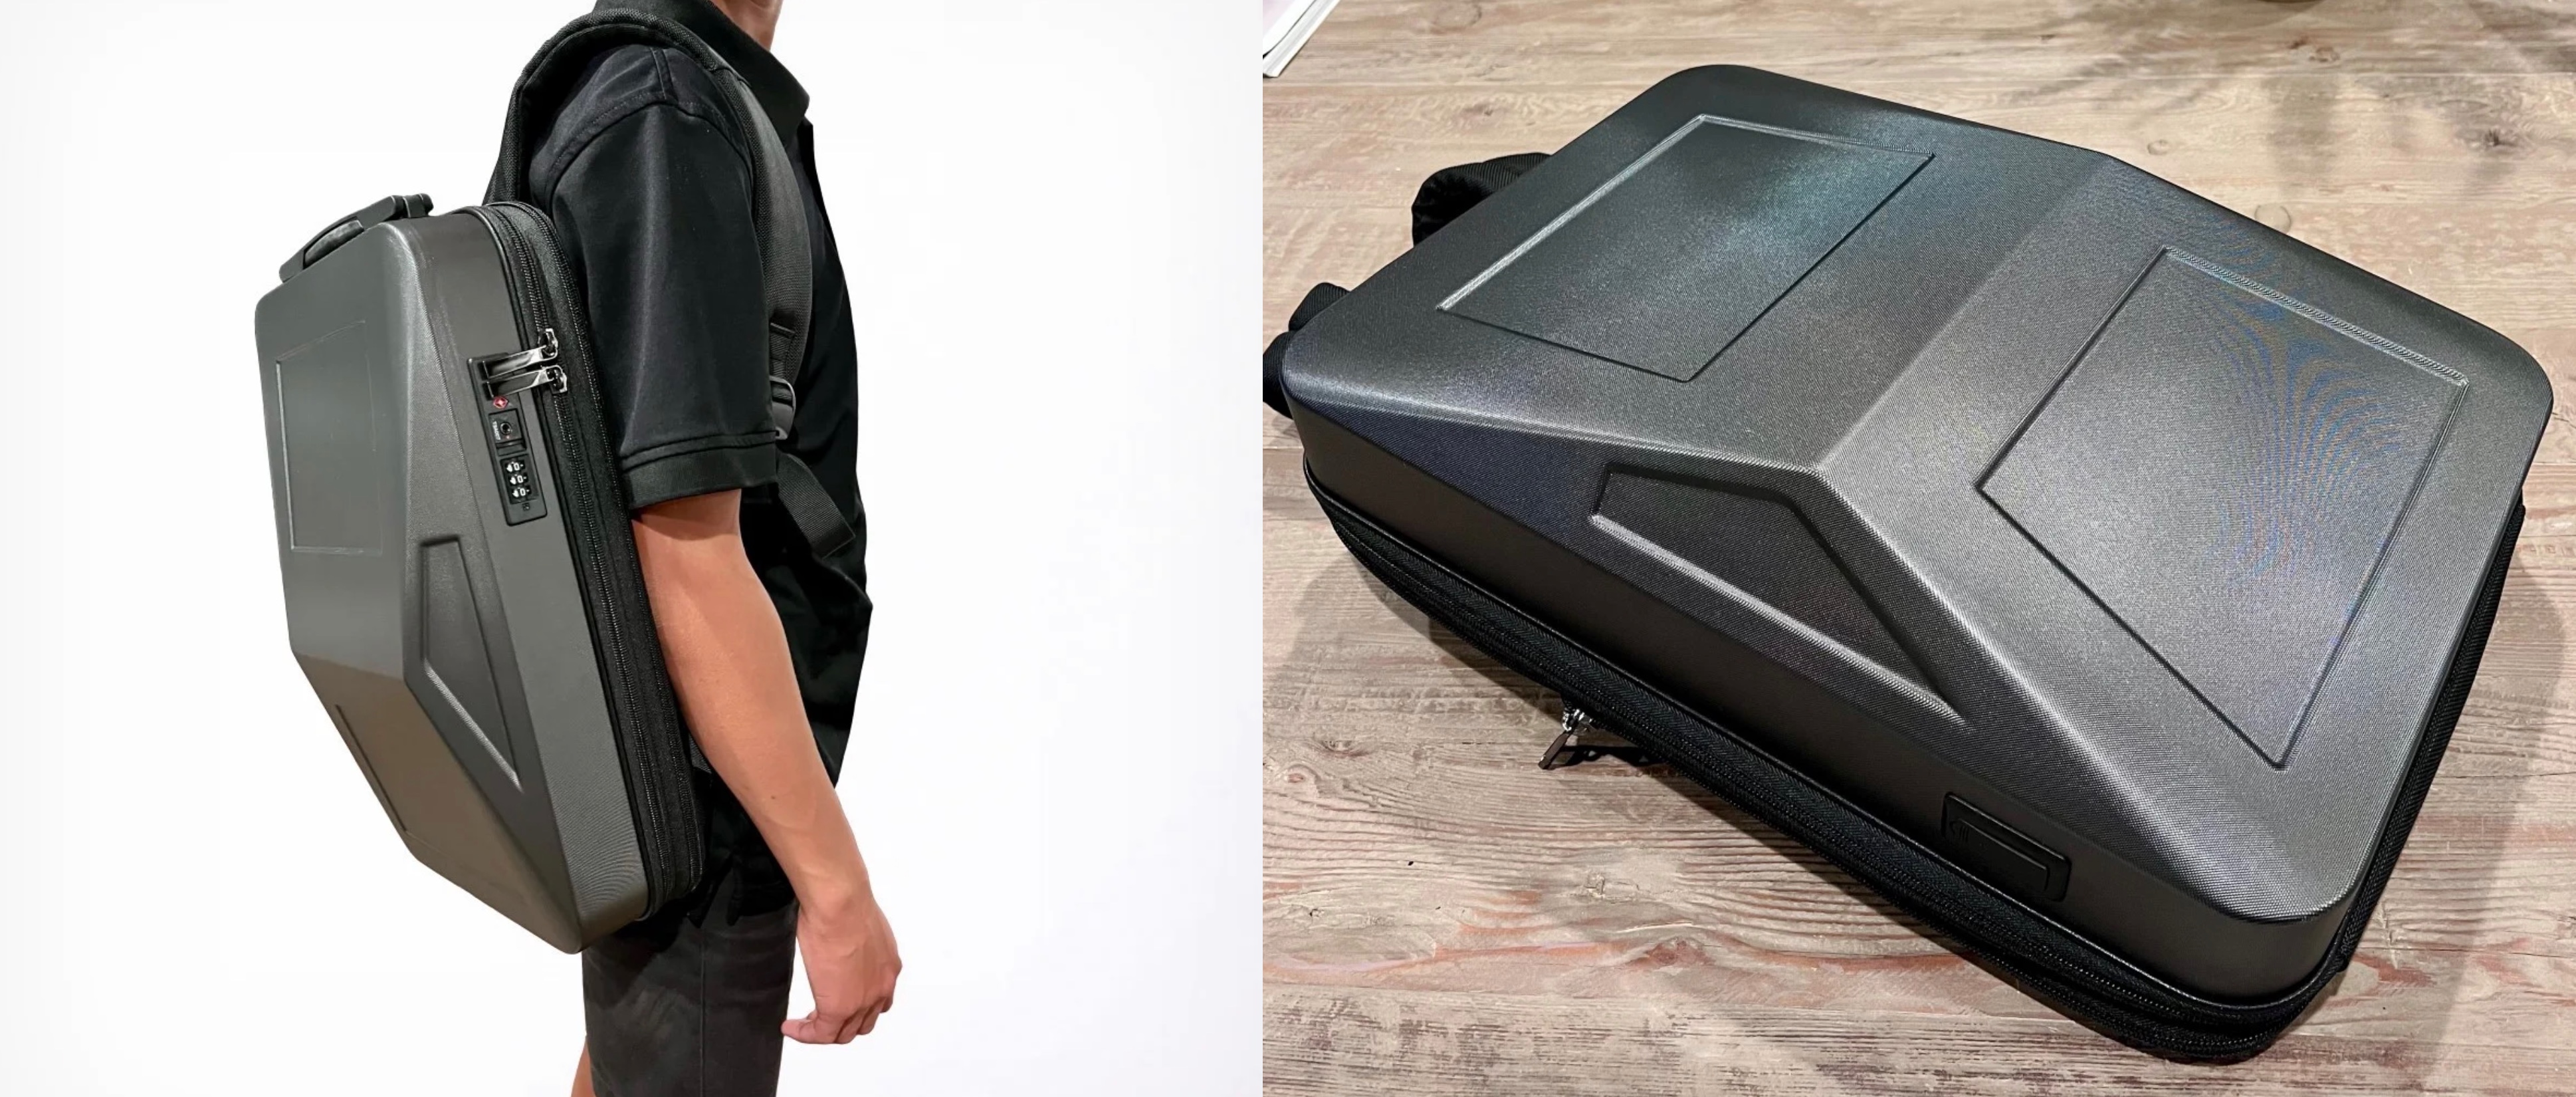 Messenger Bags for Tech Gear - Smart & Stylish Solutions | CyberBackpa